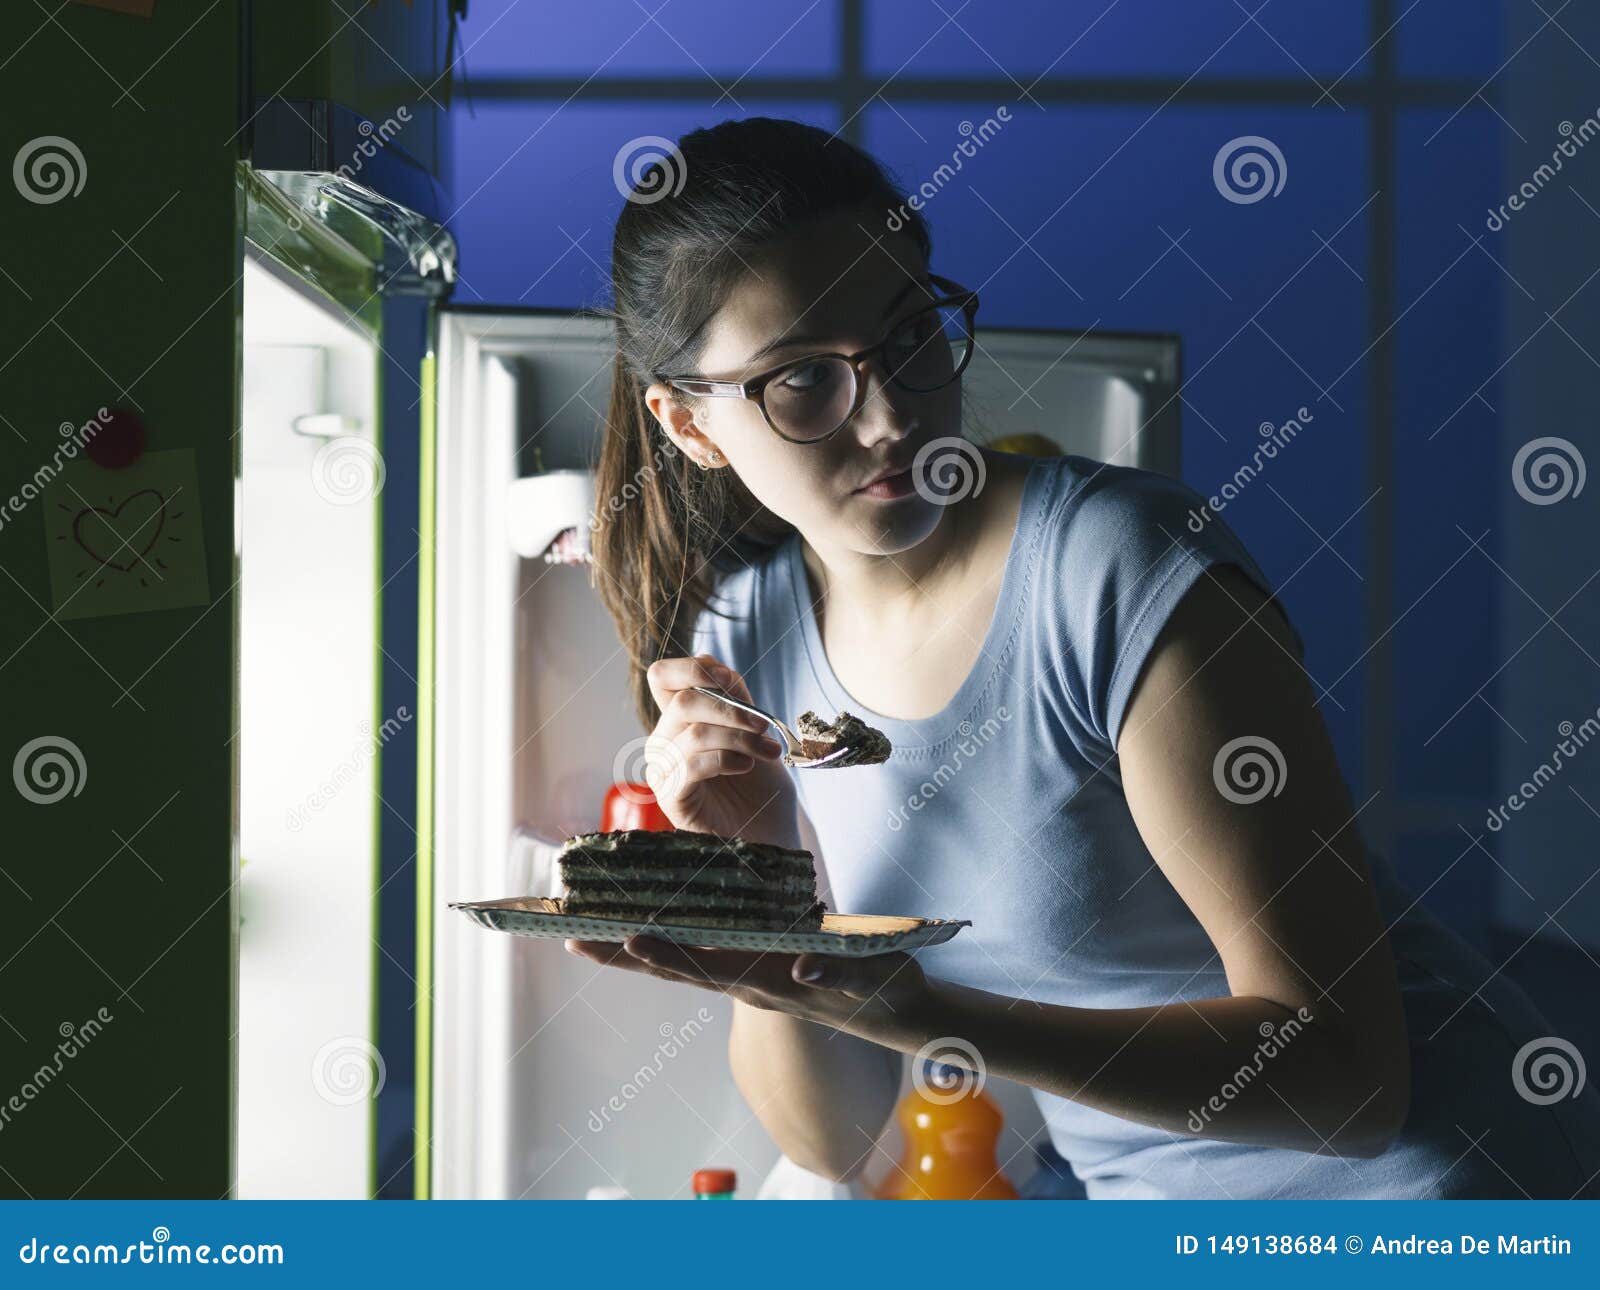 woman having a late night snack